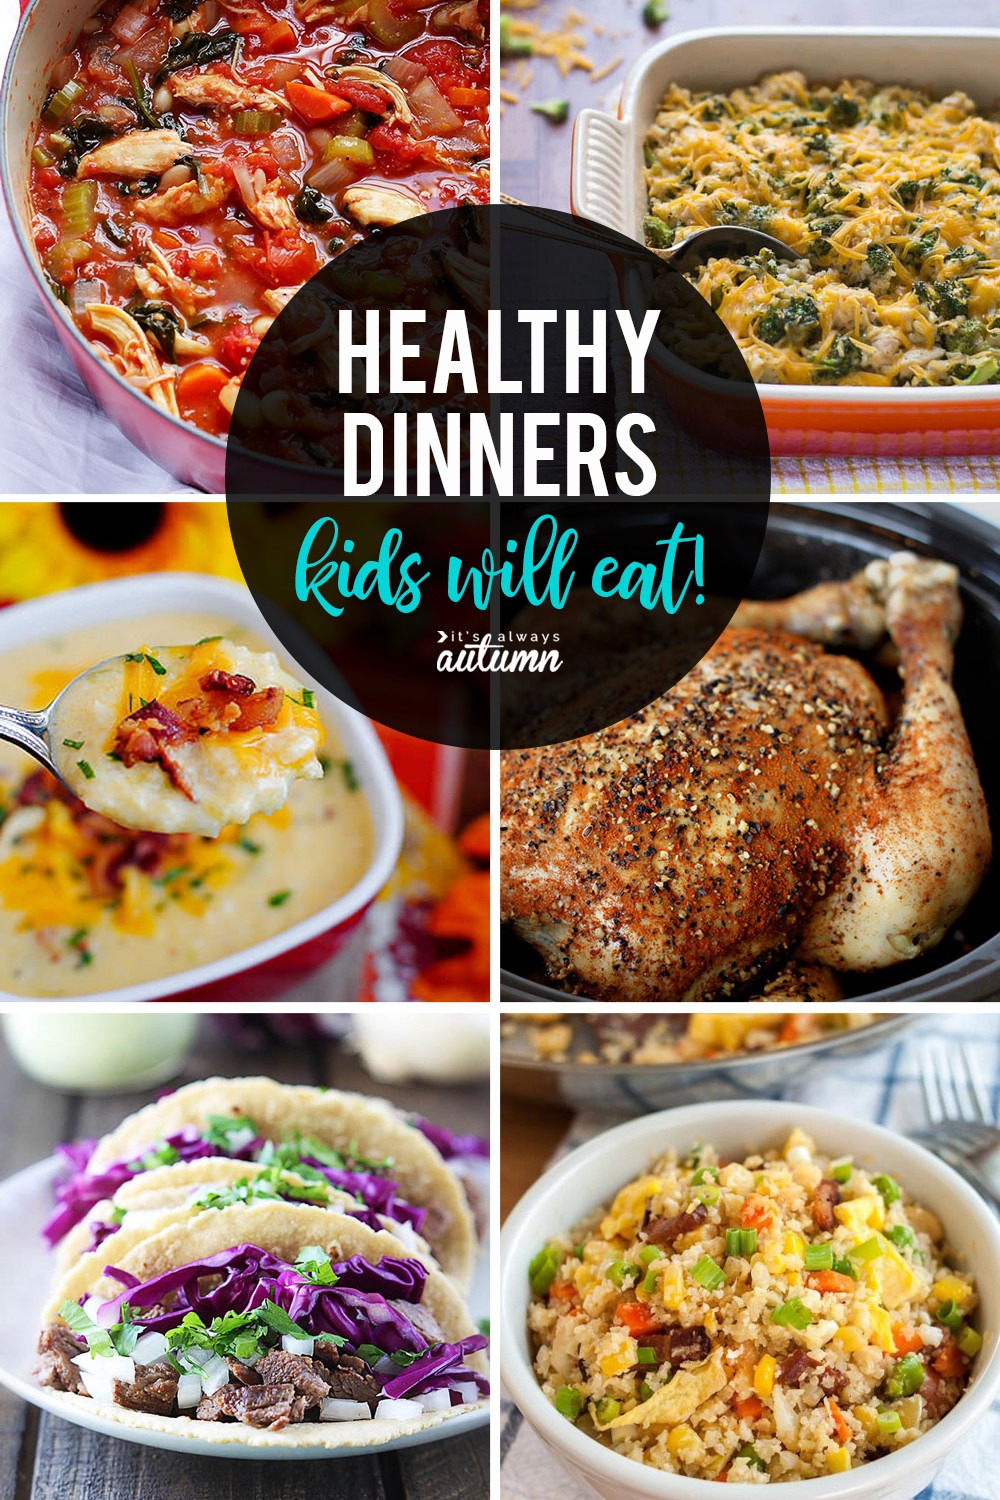 Dinner Recipes For Kids
 20 healthy easy recipes your kids will actually want to